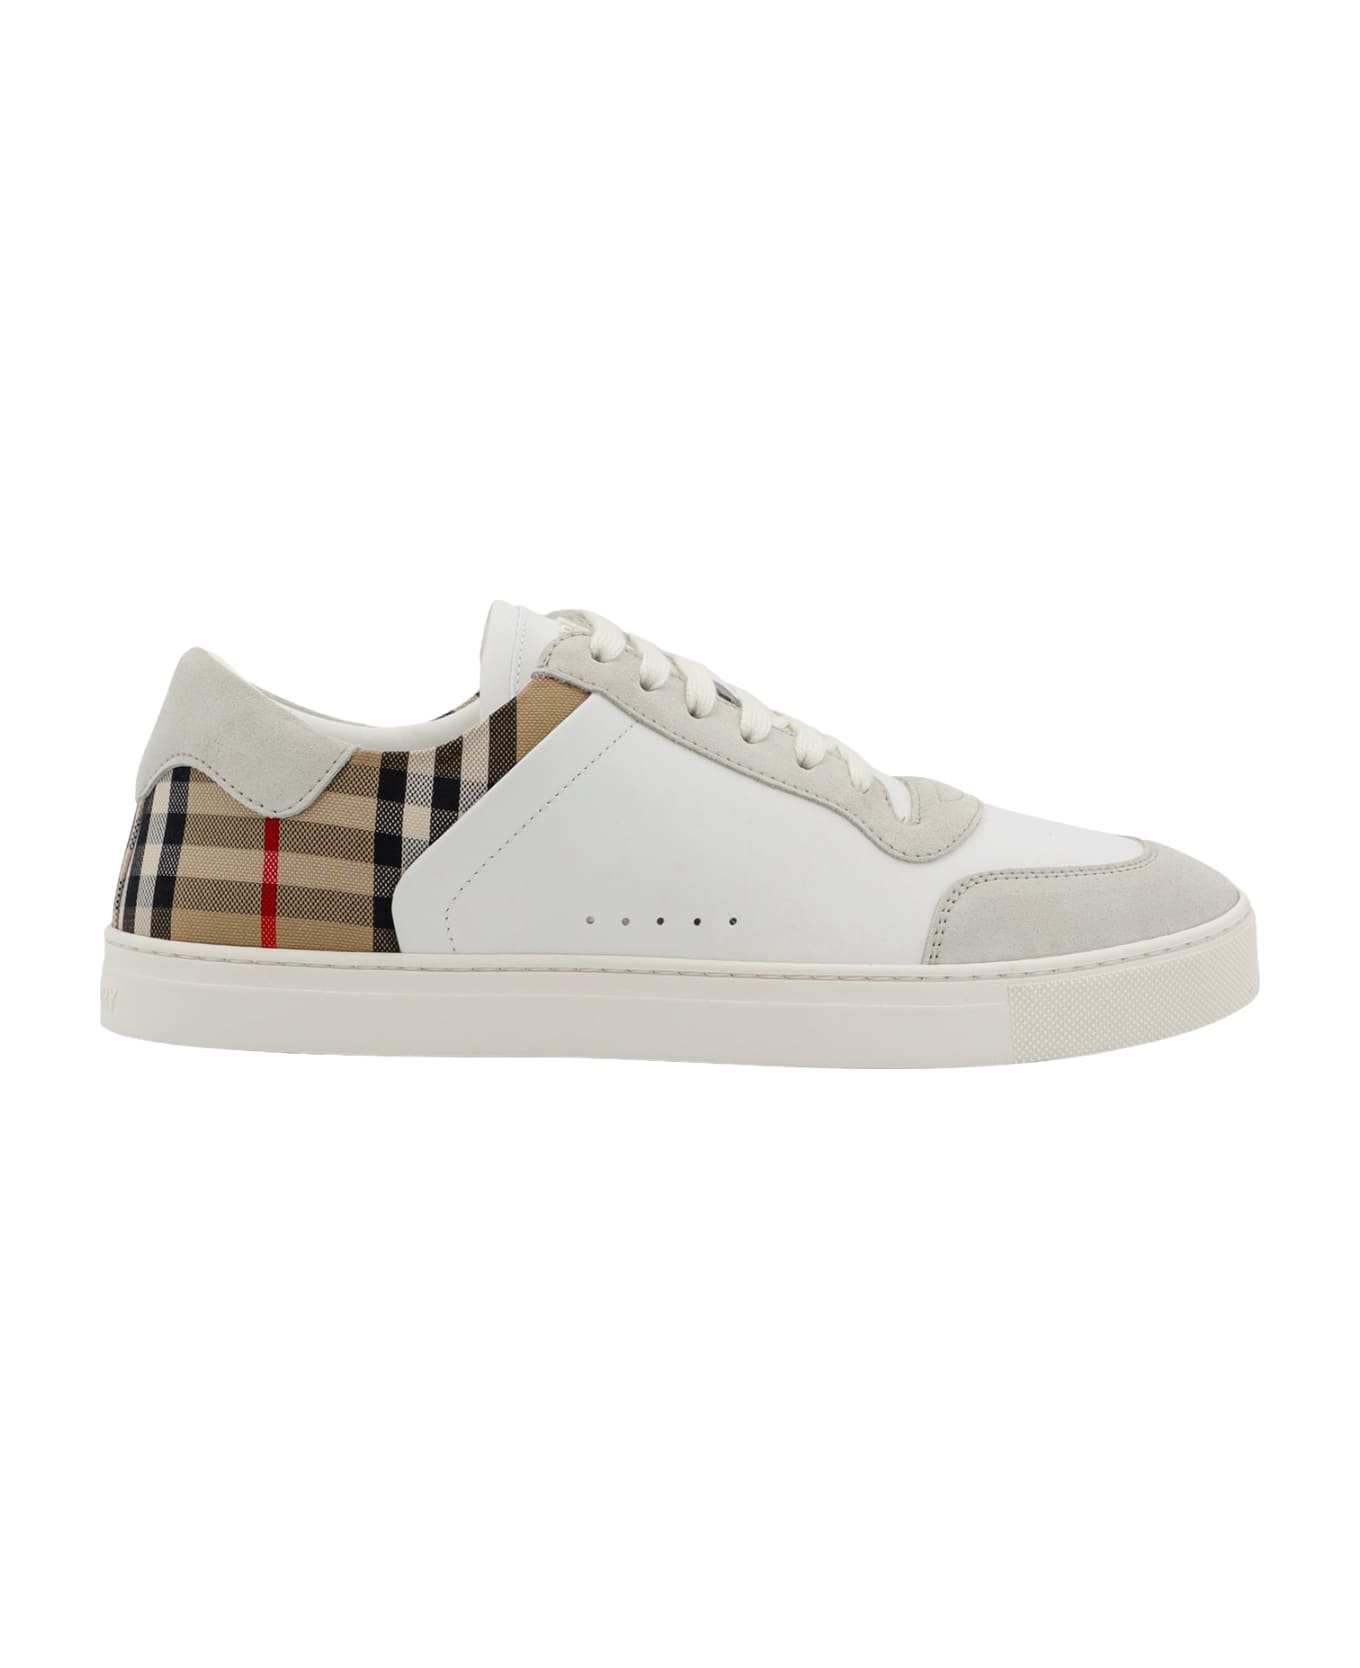 Burberry Multicolor Suede And Leather Sneakers - White